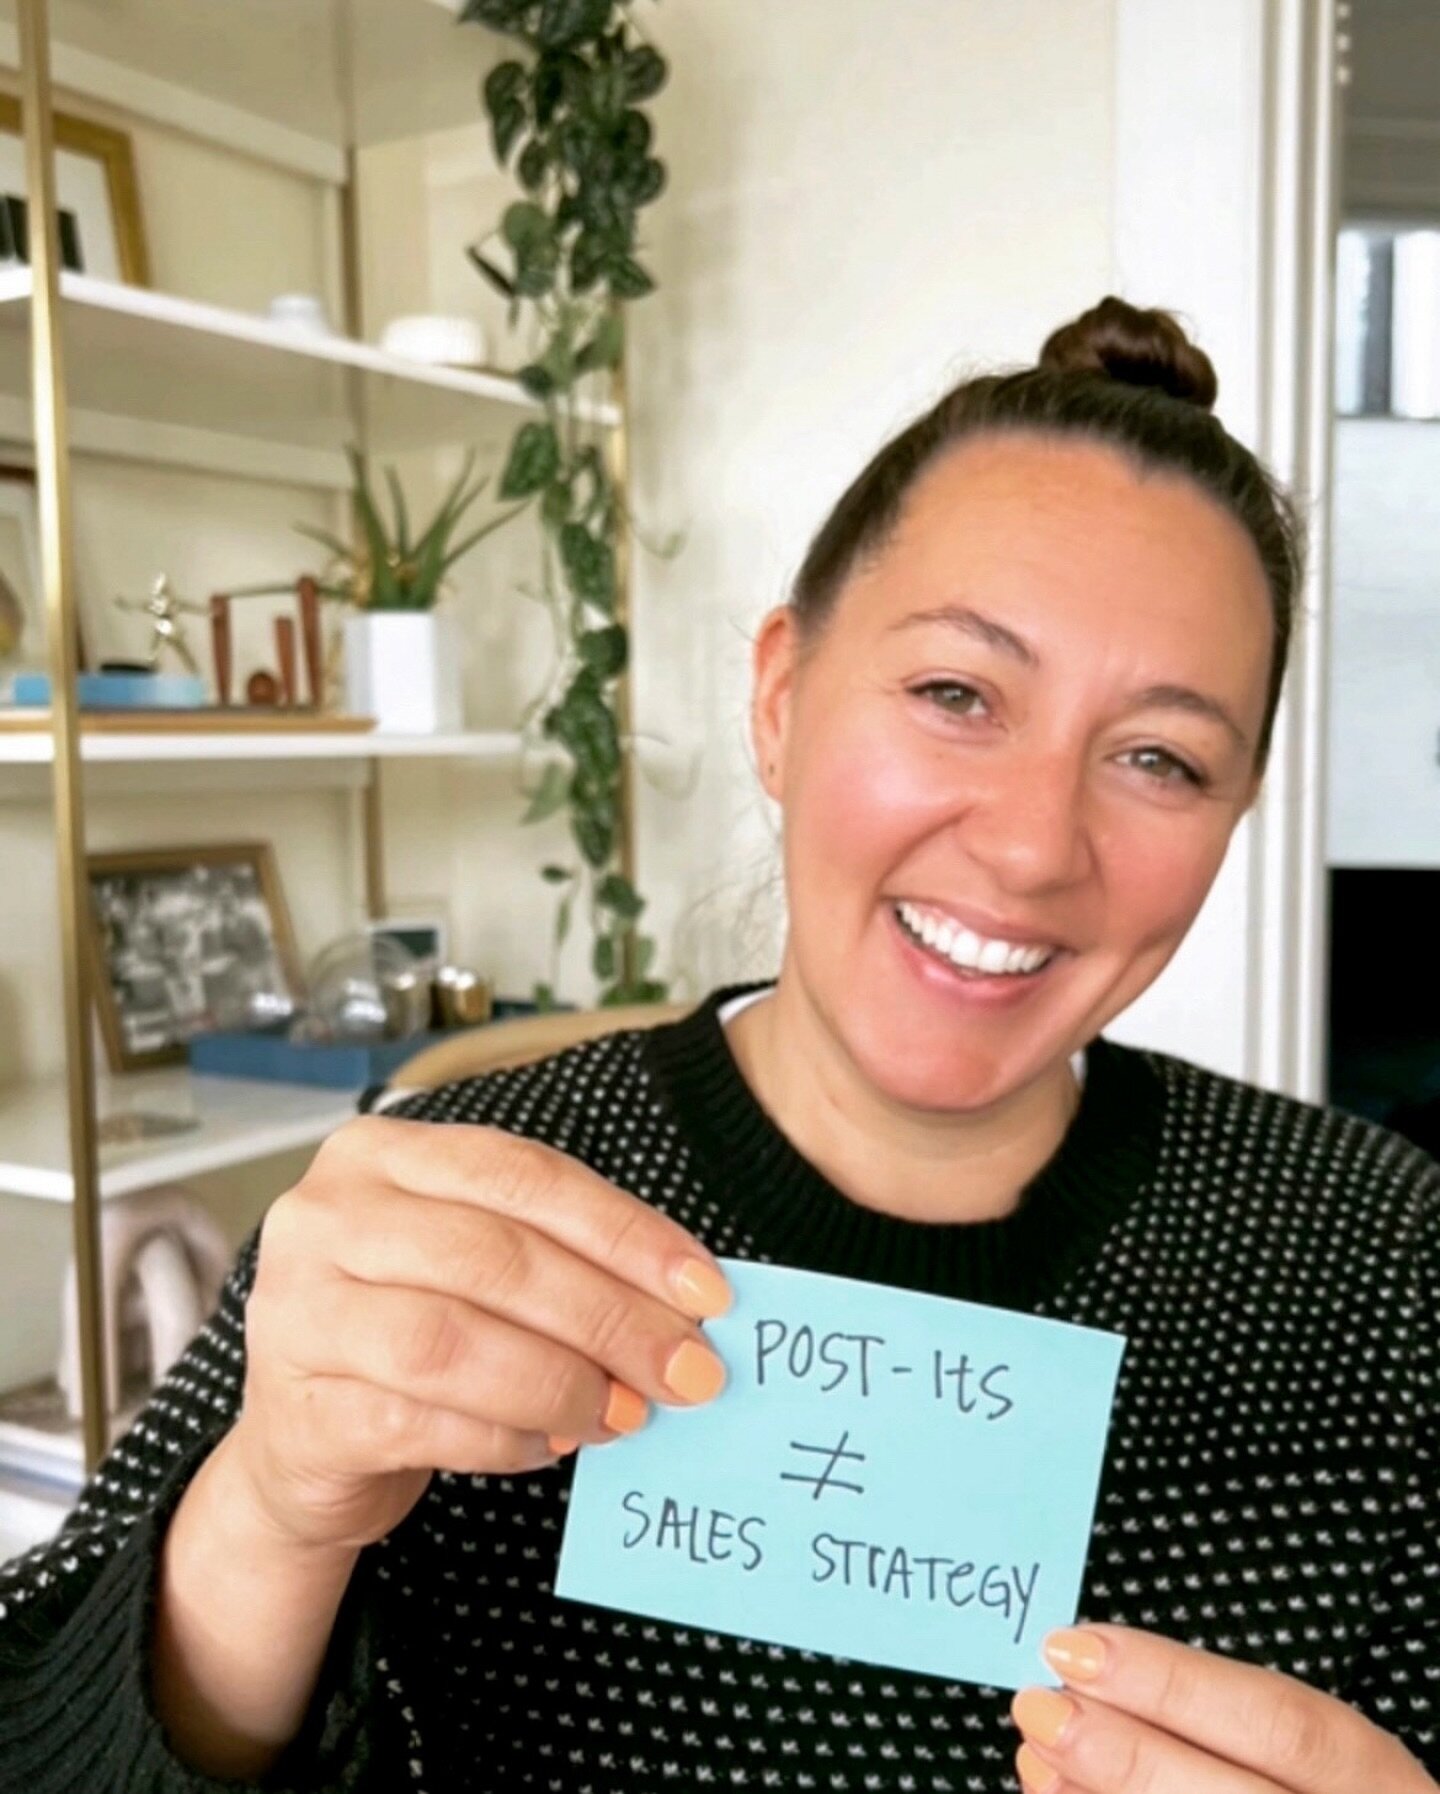 🛑 STOP RELYING ON GOOGLE CALENDAR REMINDERS, POST-IT NOTES, OR YOUR INTERNAL CLOCK TO GET YOUR REORDERS FLOWING. A post-it note is NOT a sales strategy. 

Are you ready to systemize your sales strategy and finallyyyyy stop reinventing the wheel with